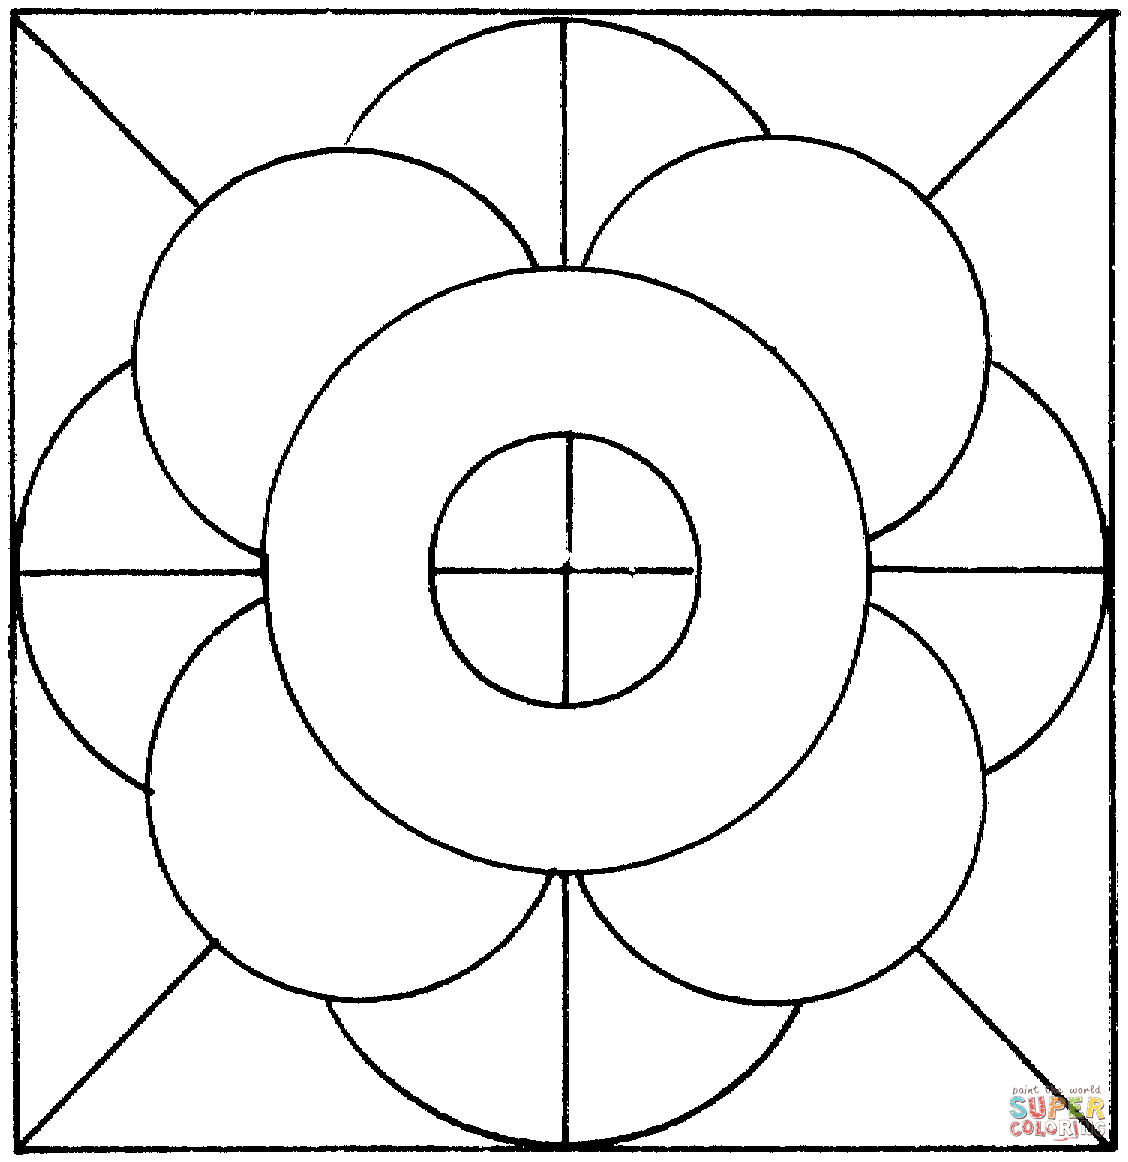 Circles And Line coloring page | Free Printable Coloring Pages